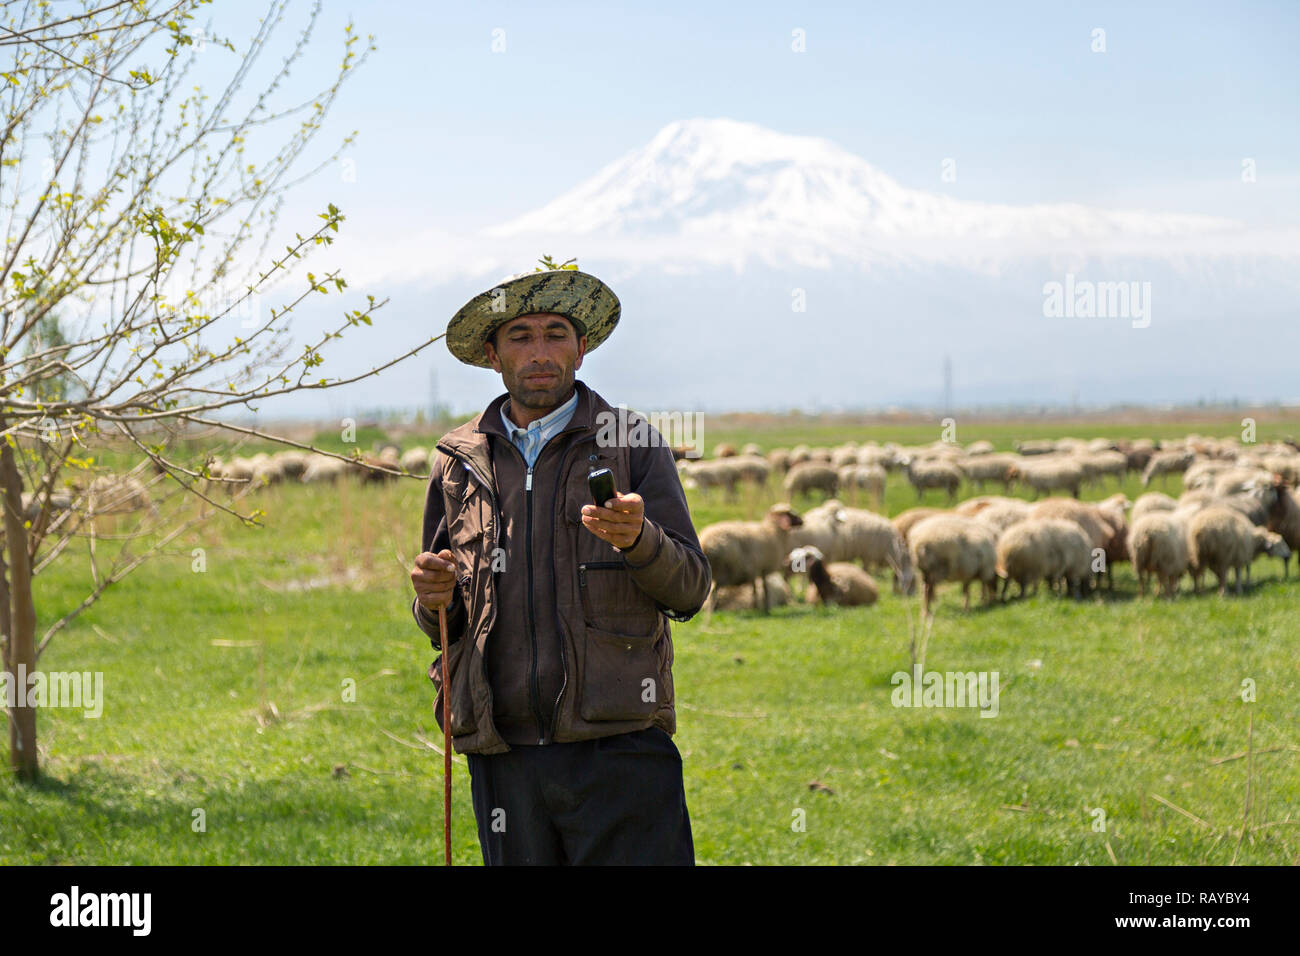 Armenian shepherd looking at his cell phone, with sheep and Mt Ararat in the background, Armenia. Stock Photo